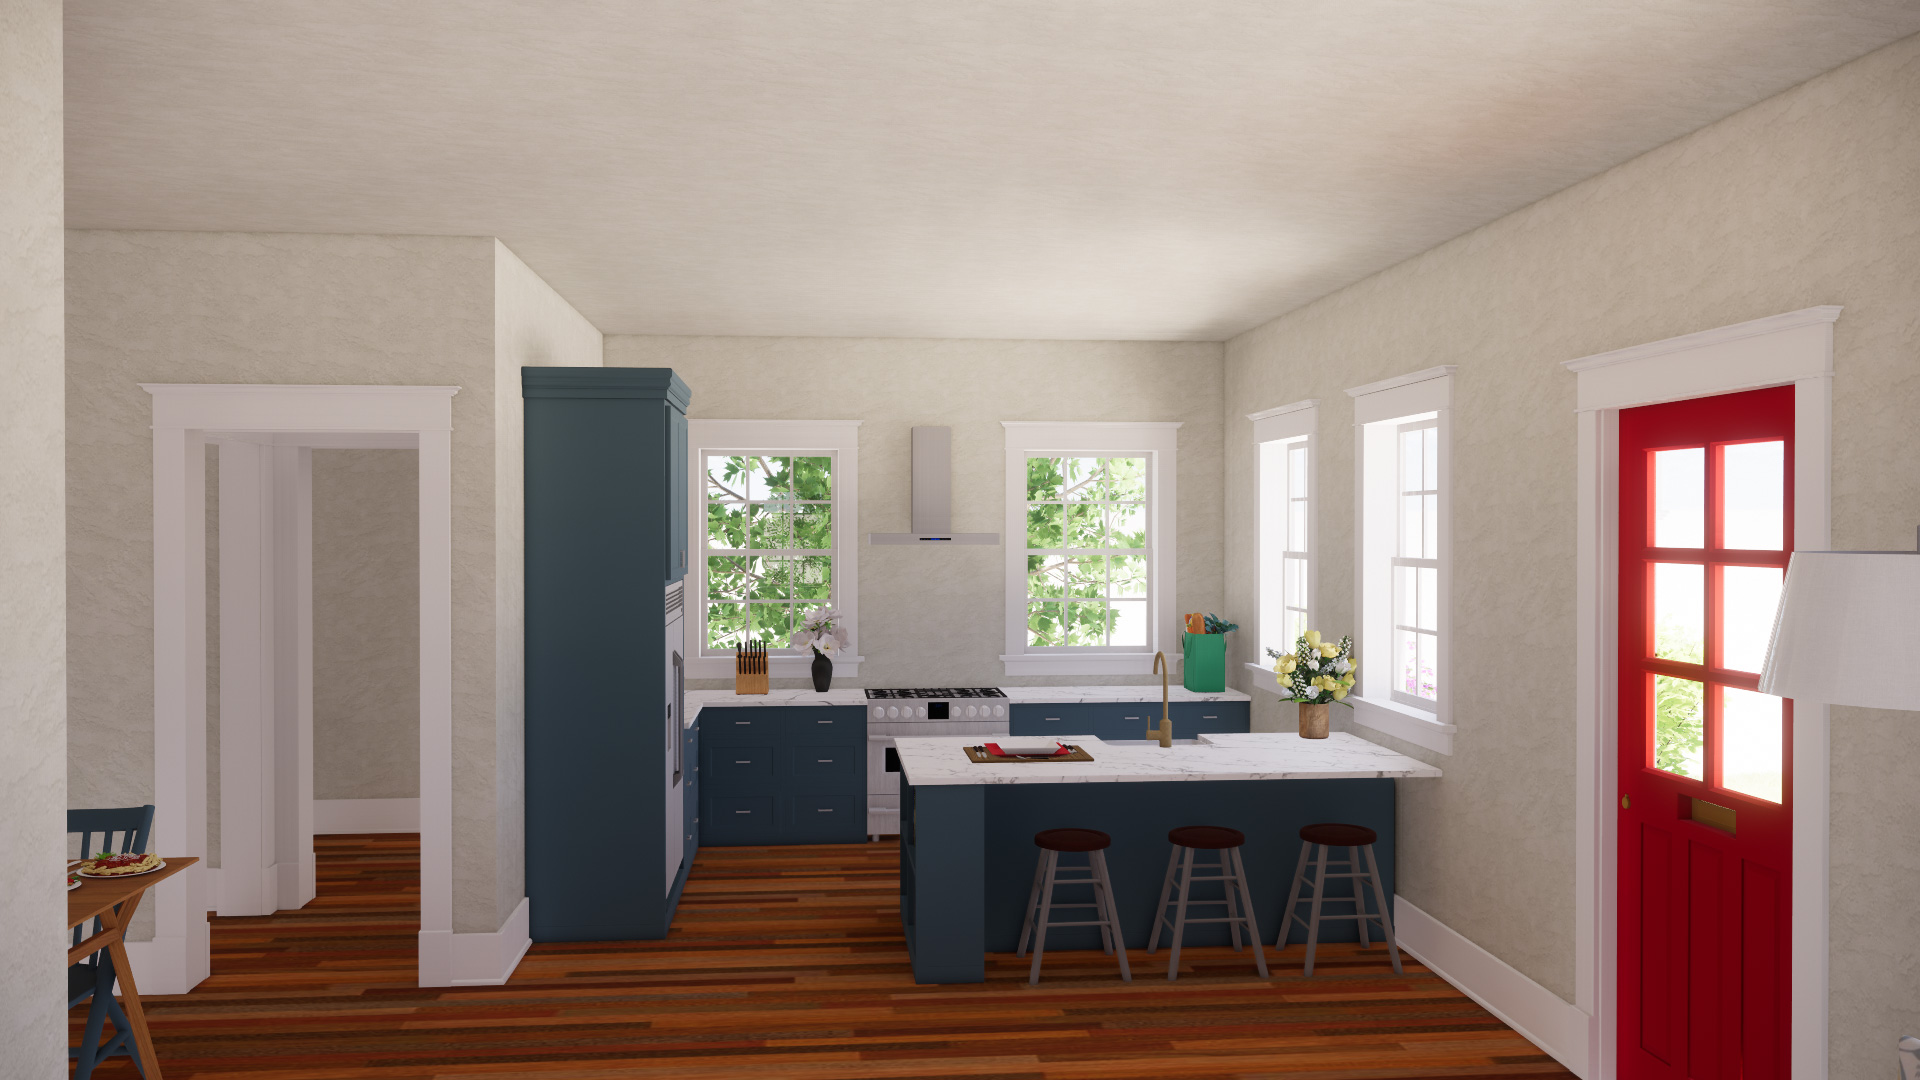 Interior render of two story style homes kitchen, with marbel countertops and gray-blue cabinets